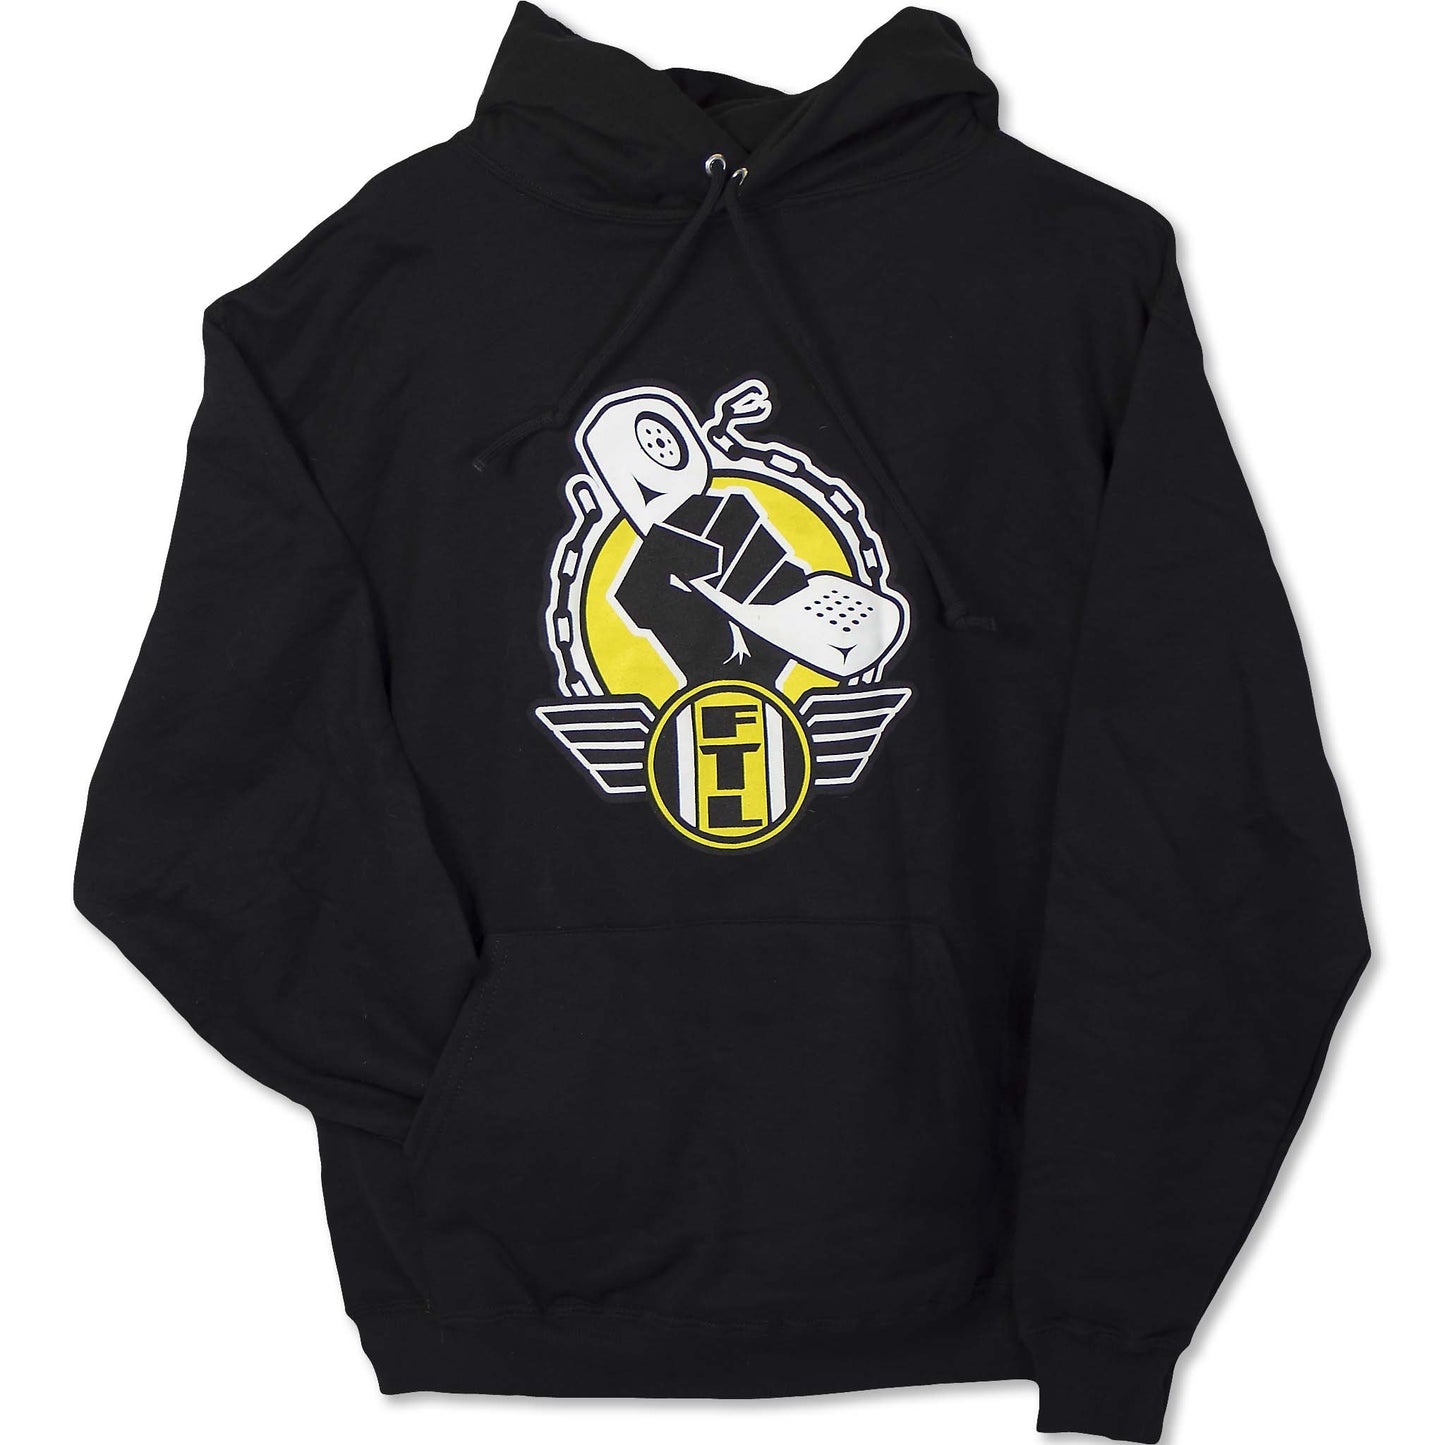 Free Talk Live Pullover Hoodie